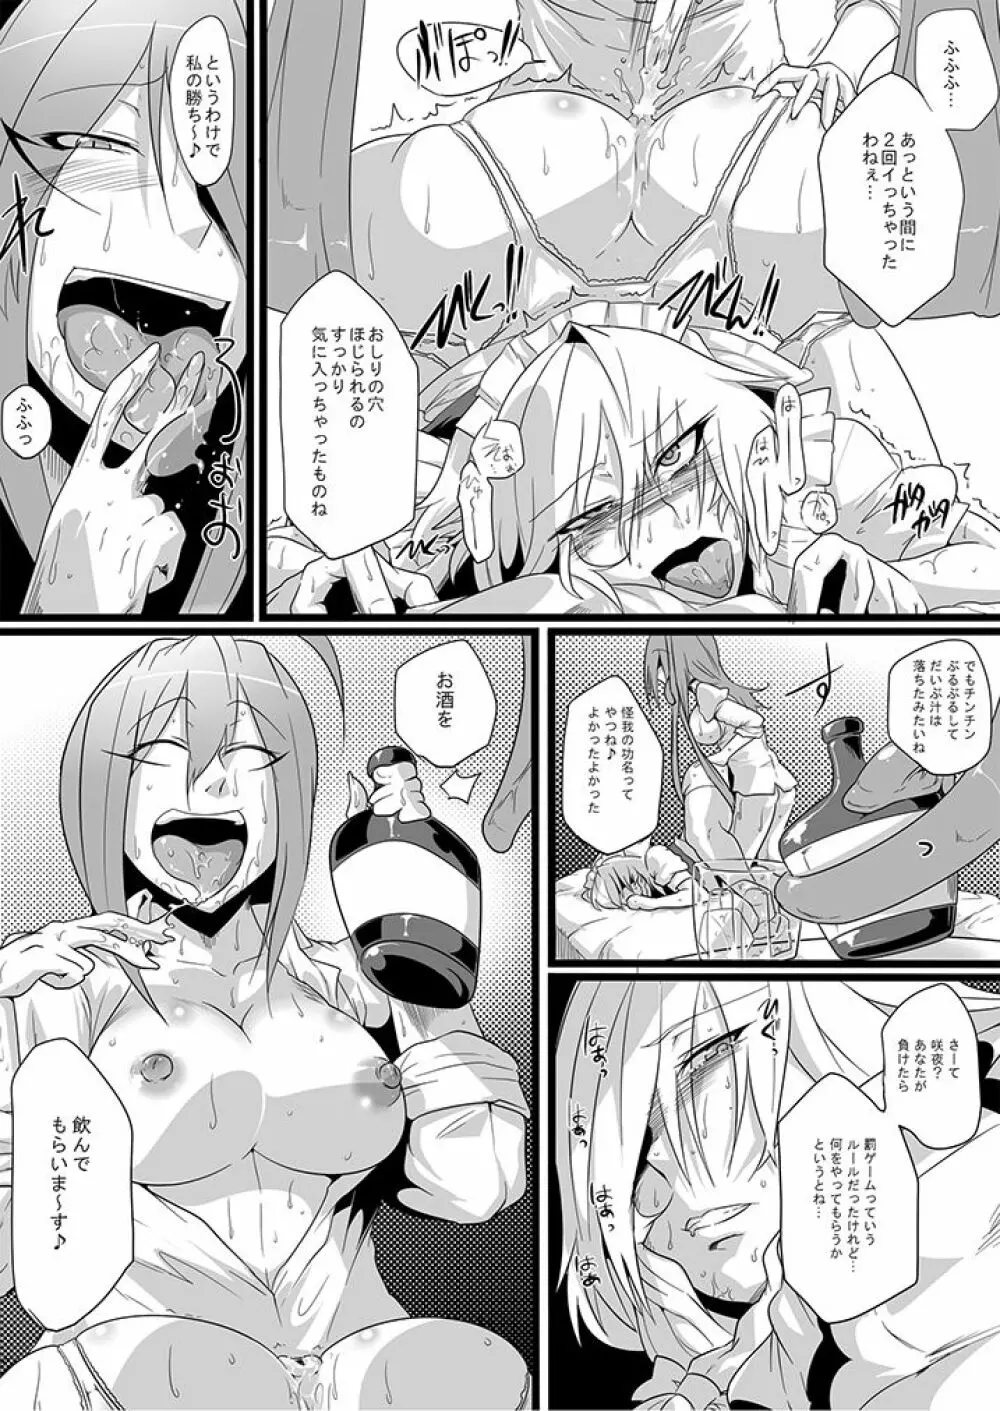 SAKUYA MAID in HEAVEN/ALL IN 1 - page231